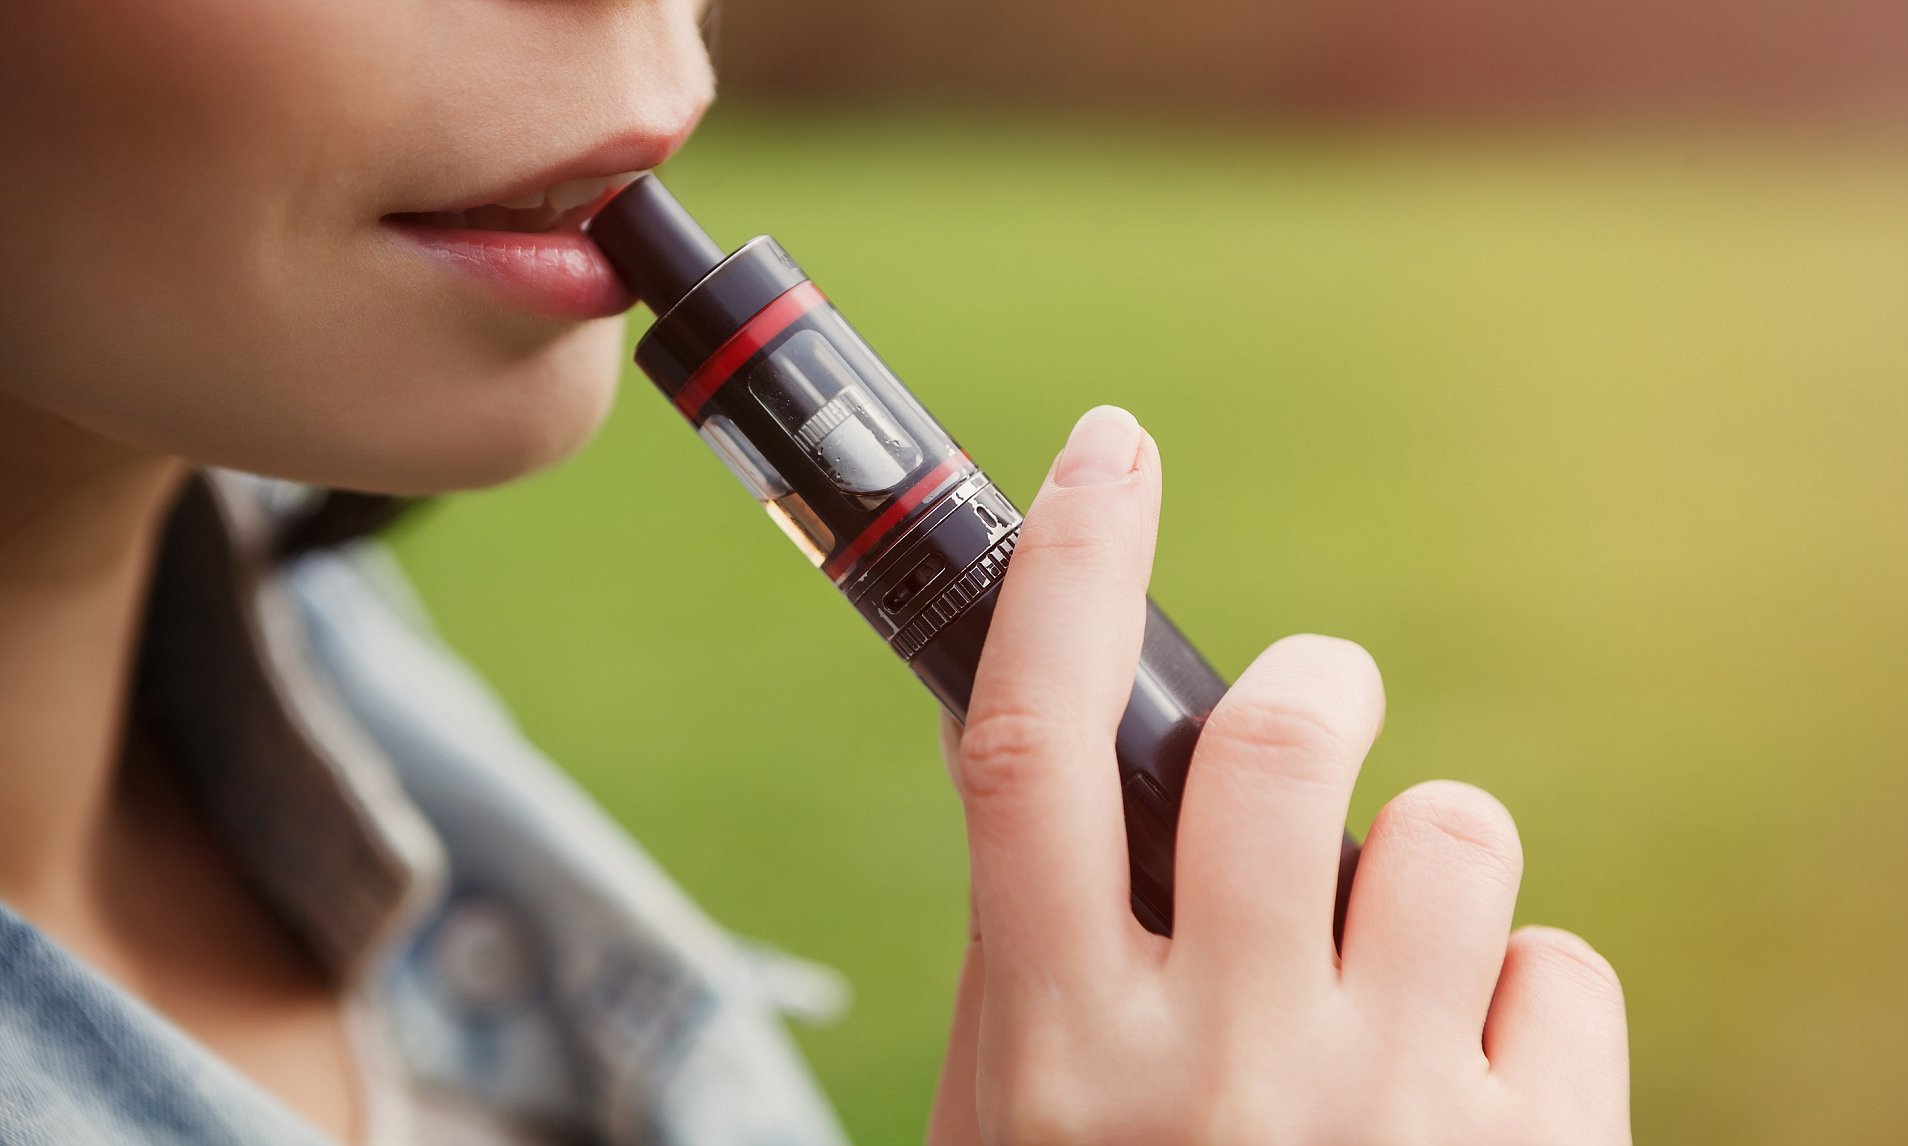 Vaper girl smokes electronic cigarette with tasty flavored glycerin liquid.Young woman holds vaping device with lips.Modern e-cig gadget helps smokers to quit smoking nicotine cigarettes; Shutterstock ID 518659903